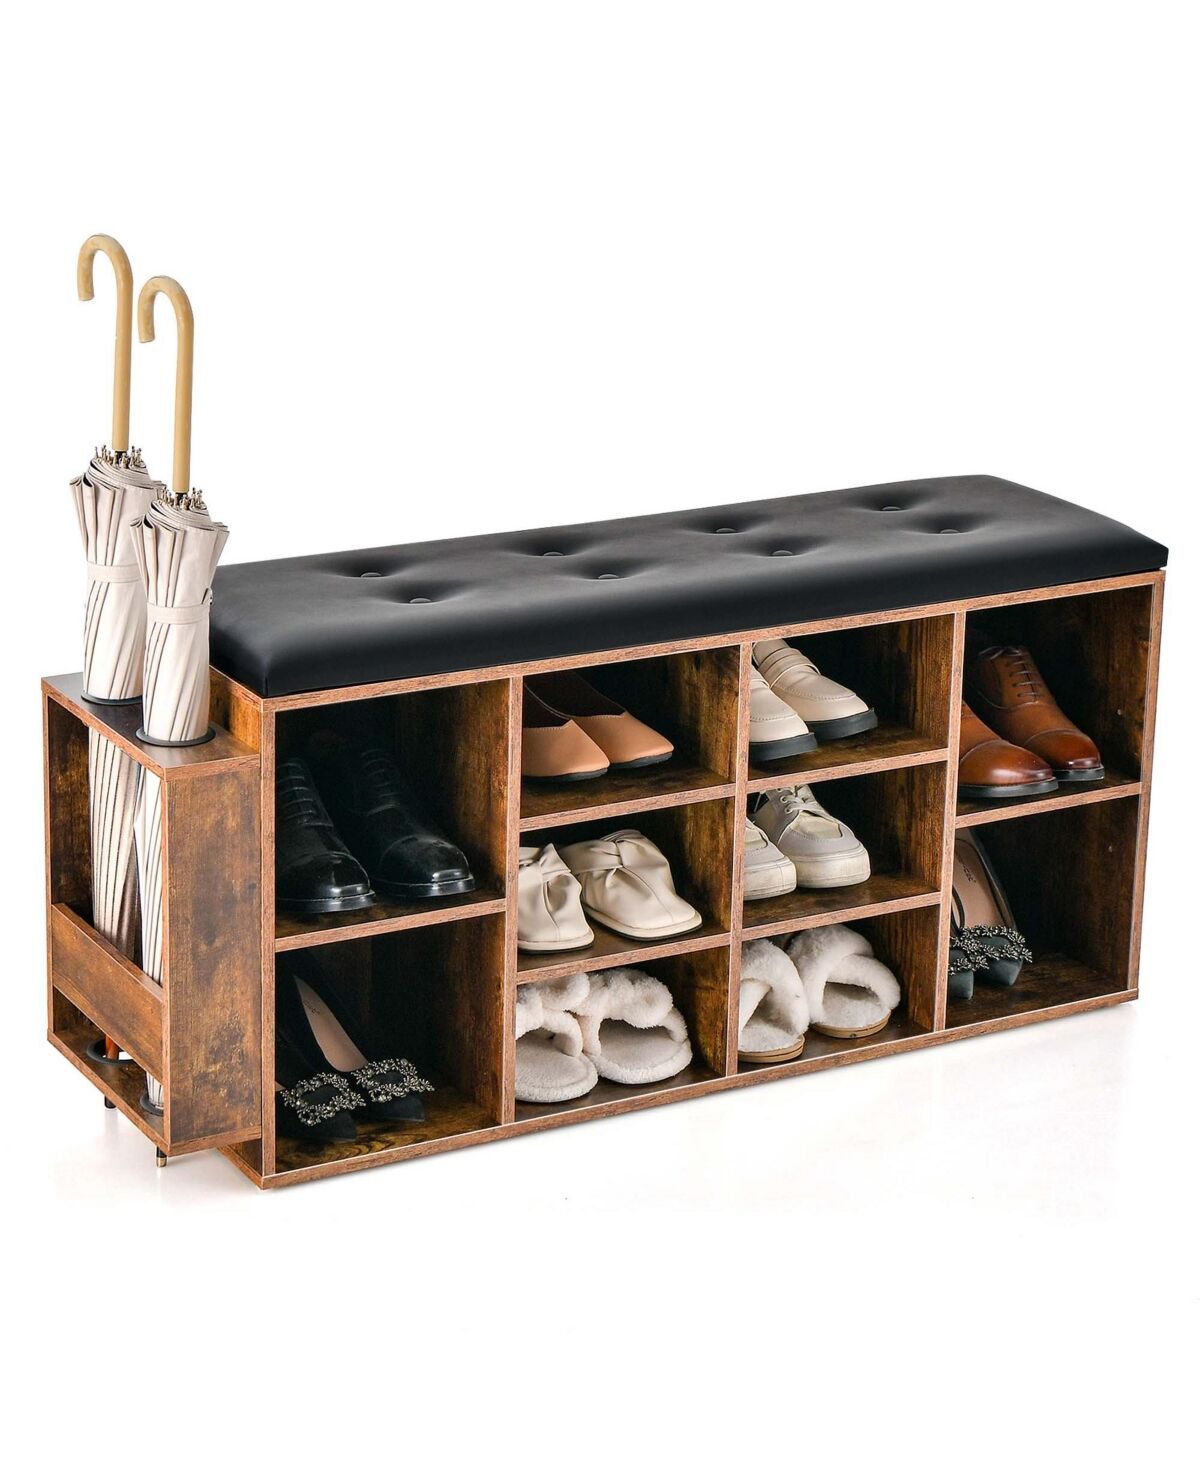 Costway Wooden Shoe Bench 10-Cube Storage Organizer with Padded Cushion & Umbrella Holder - Brown